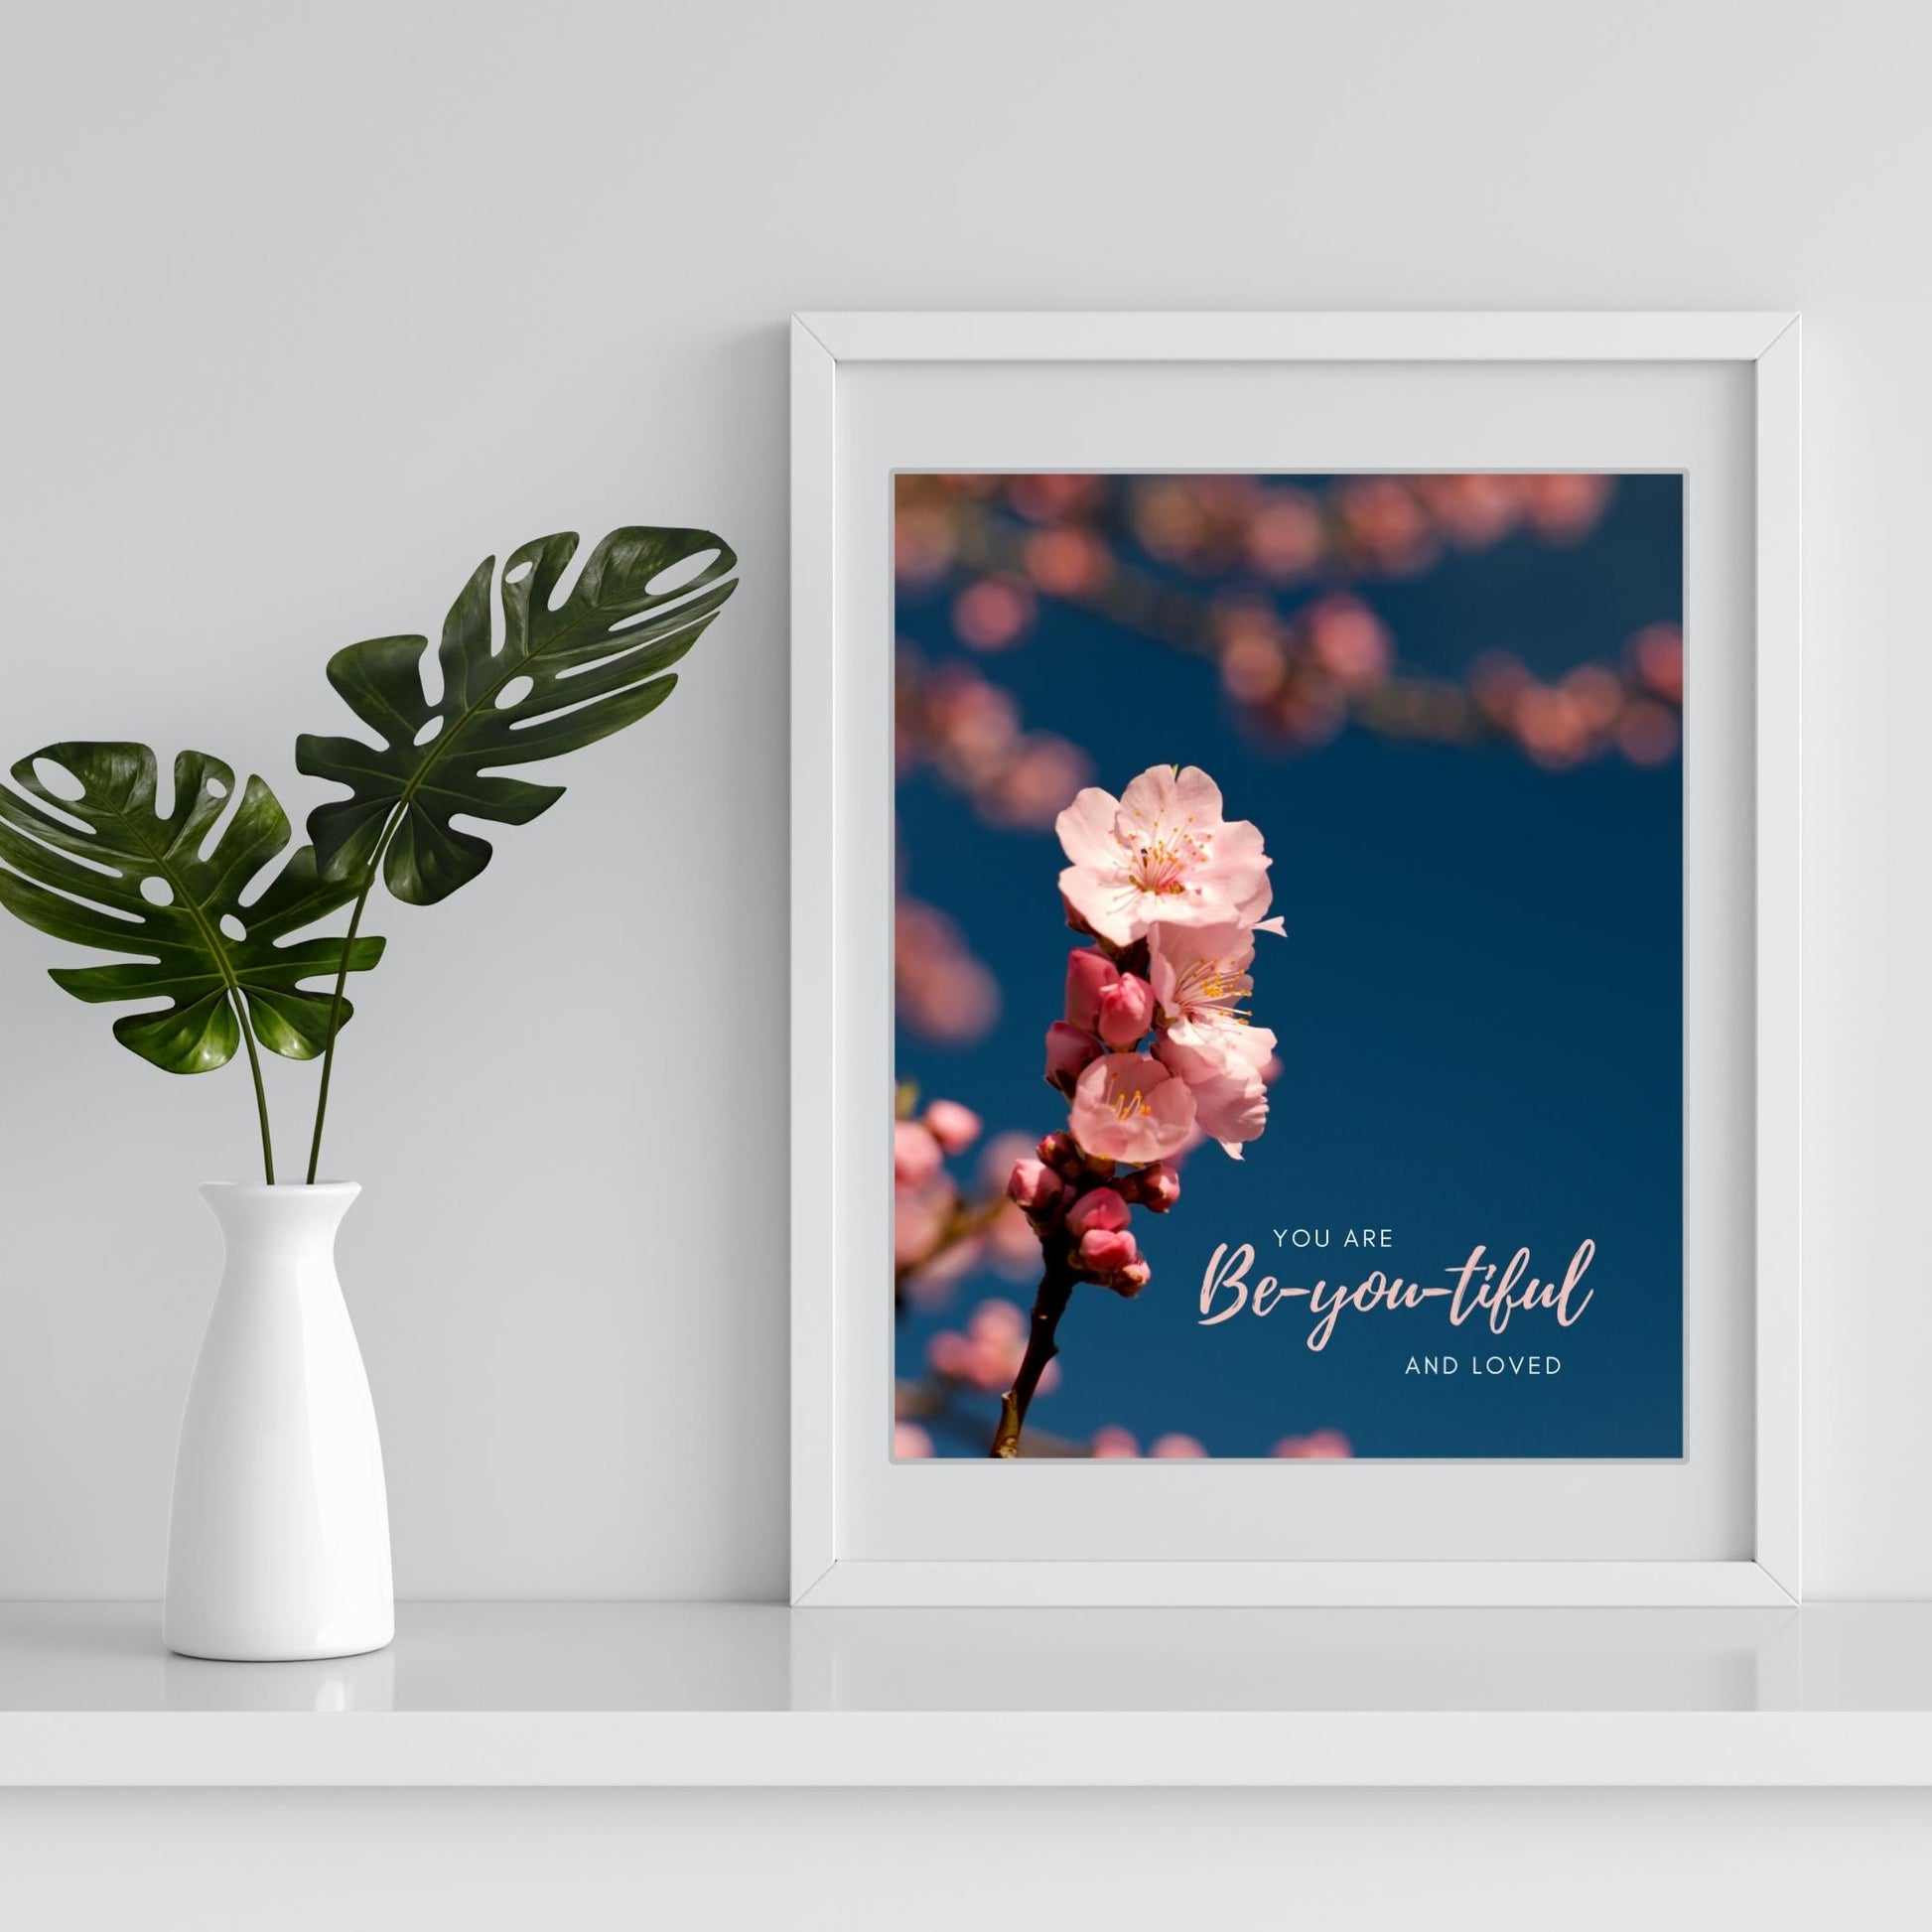 Inspirational Word Art - YOU ARE Be-you-tiful AND LOVED - Pink Flowering Branch Wall Decor (8x10 print) | Shown in a white frame on a white tabletop next to greenery | oak7west.com